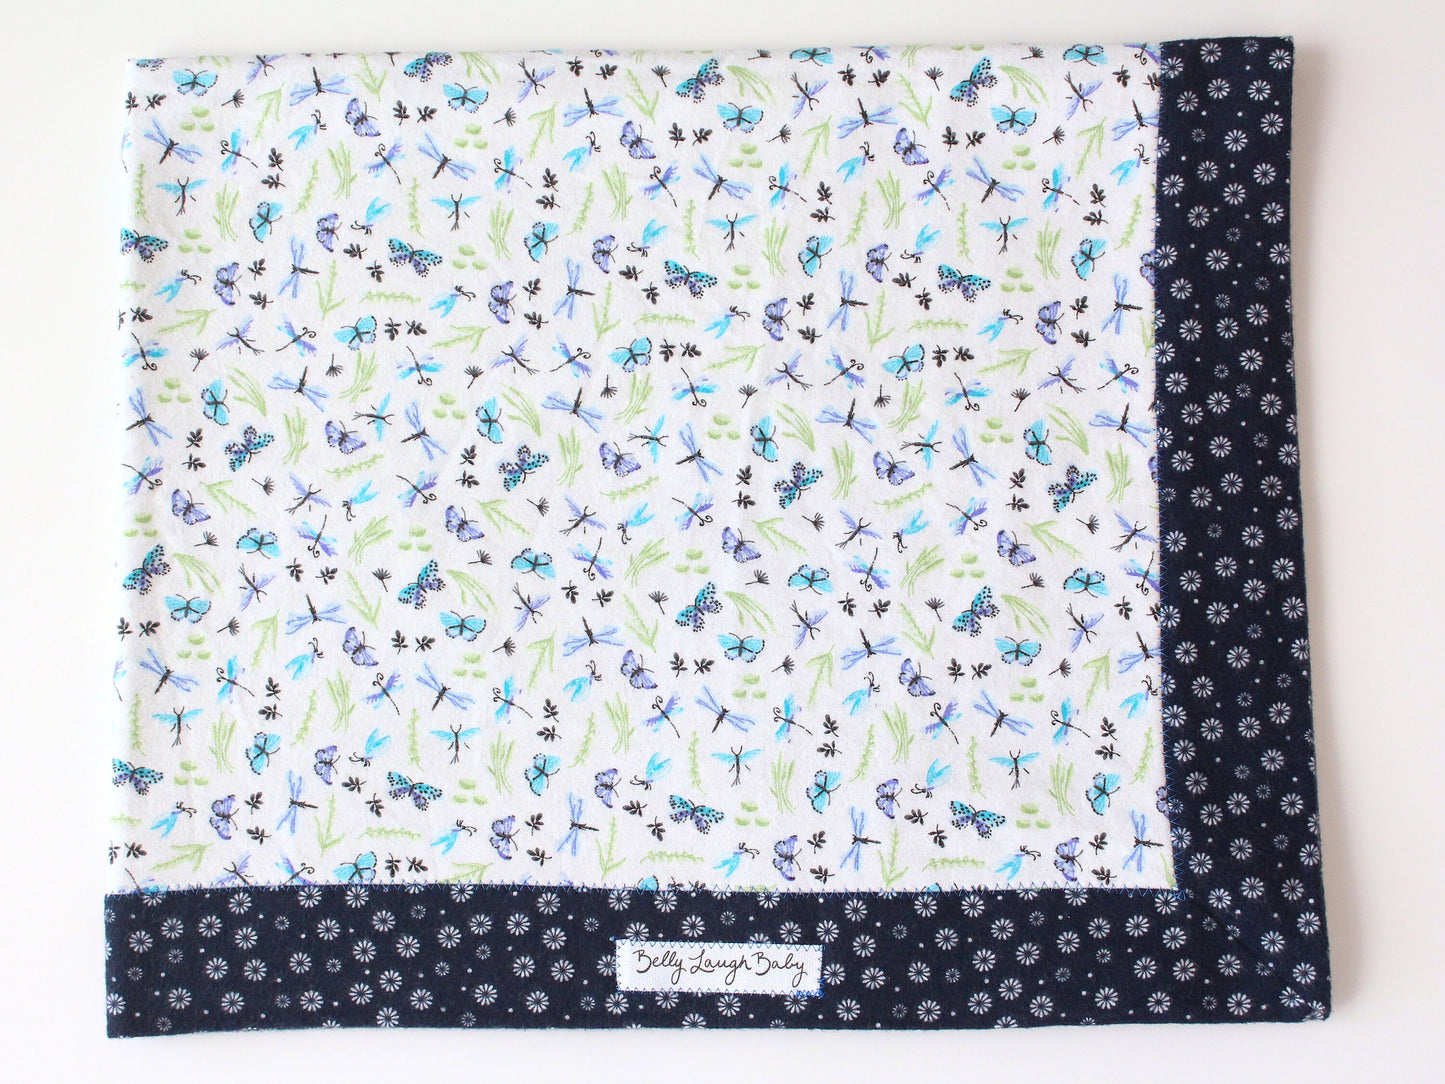 Butterfly Dragonfly Self Binding Flannel Baby Blanket | Dragonfly Baby Blanket | CPSC Compliant